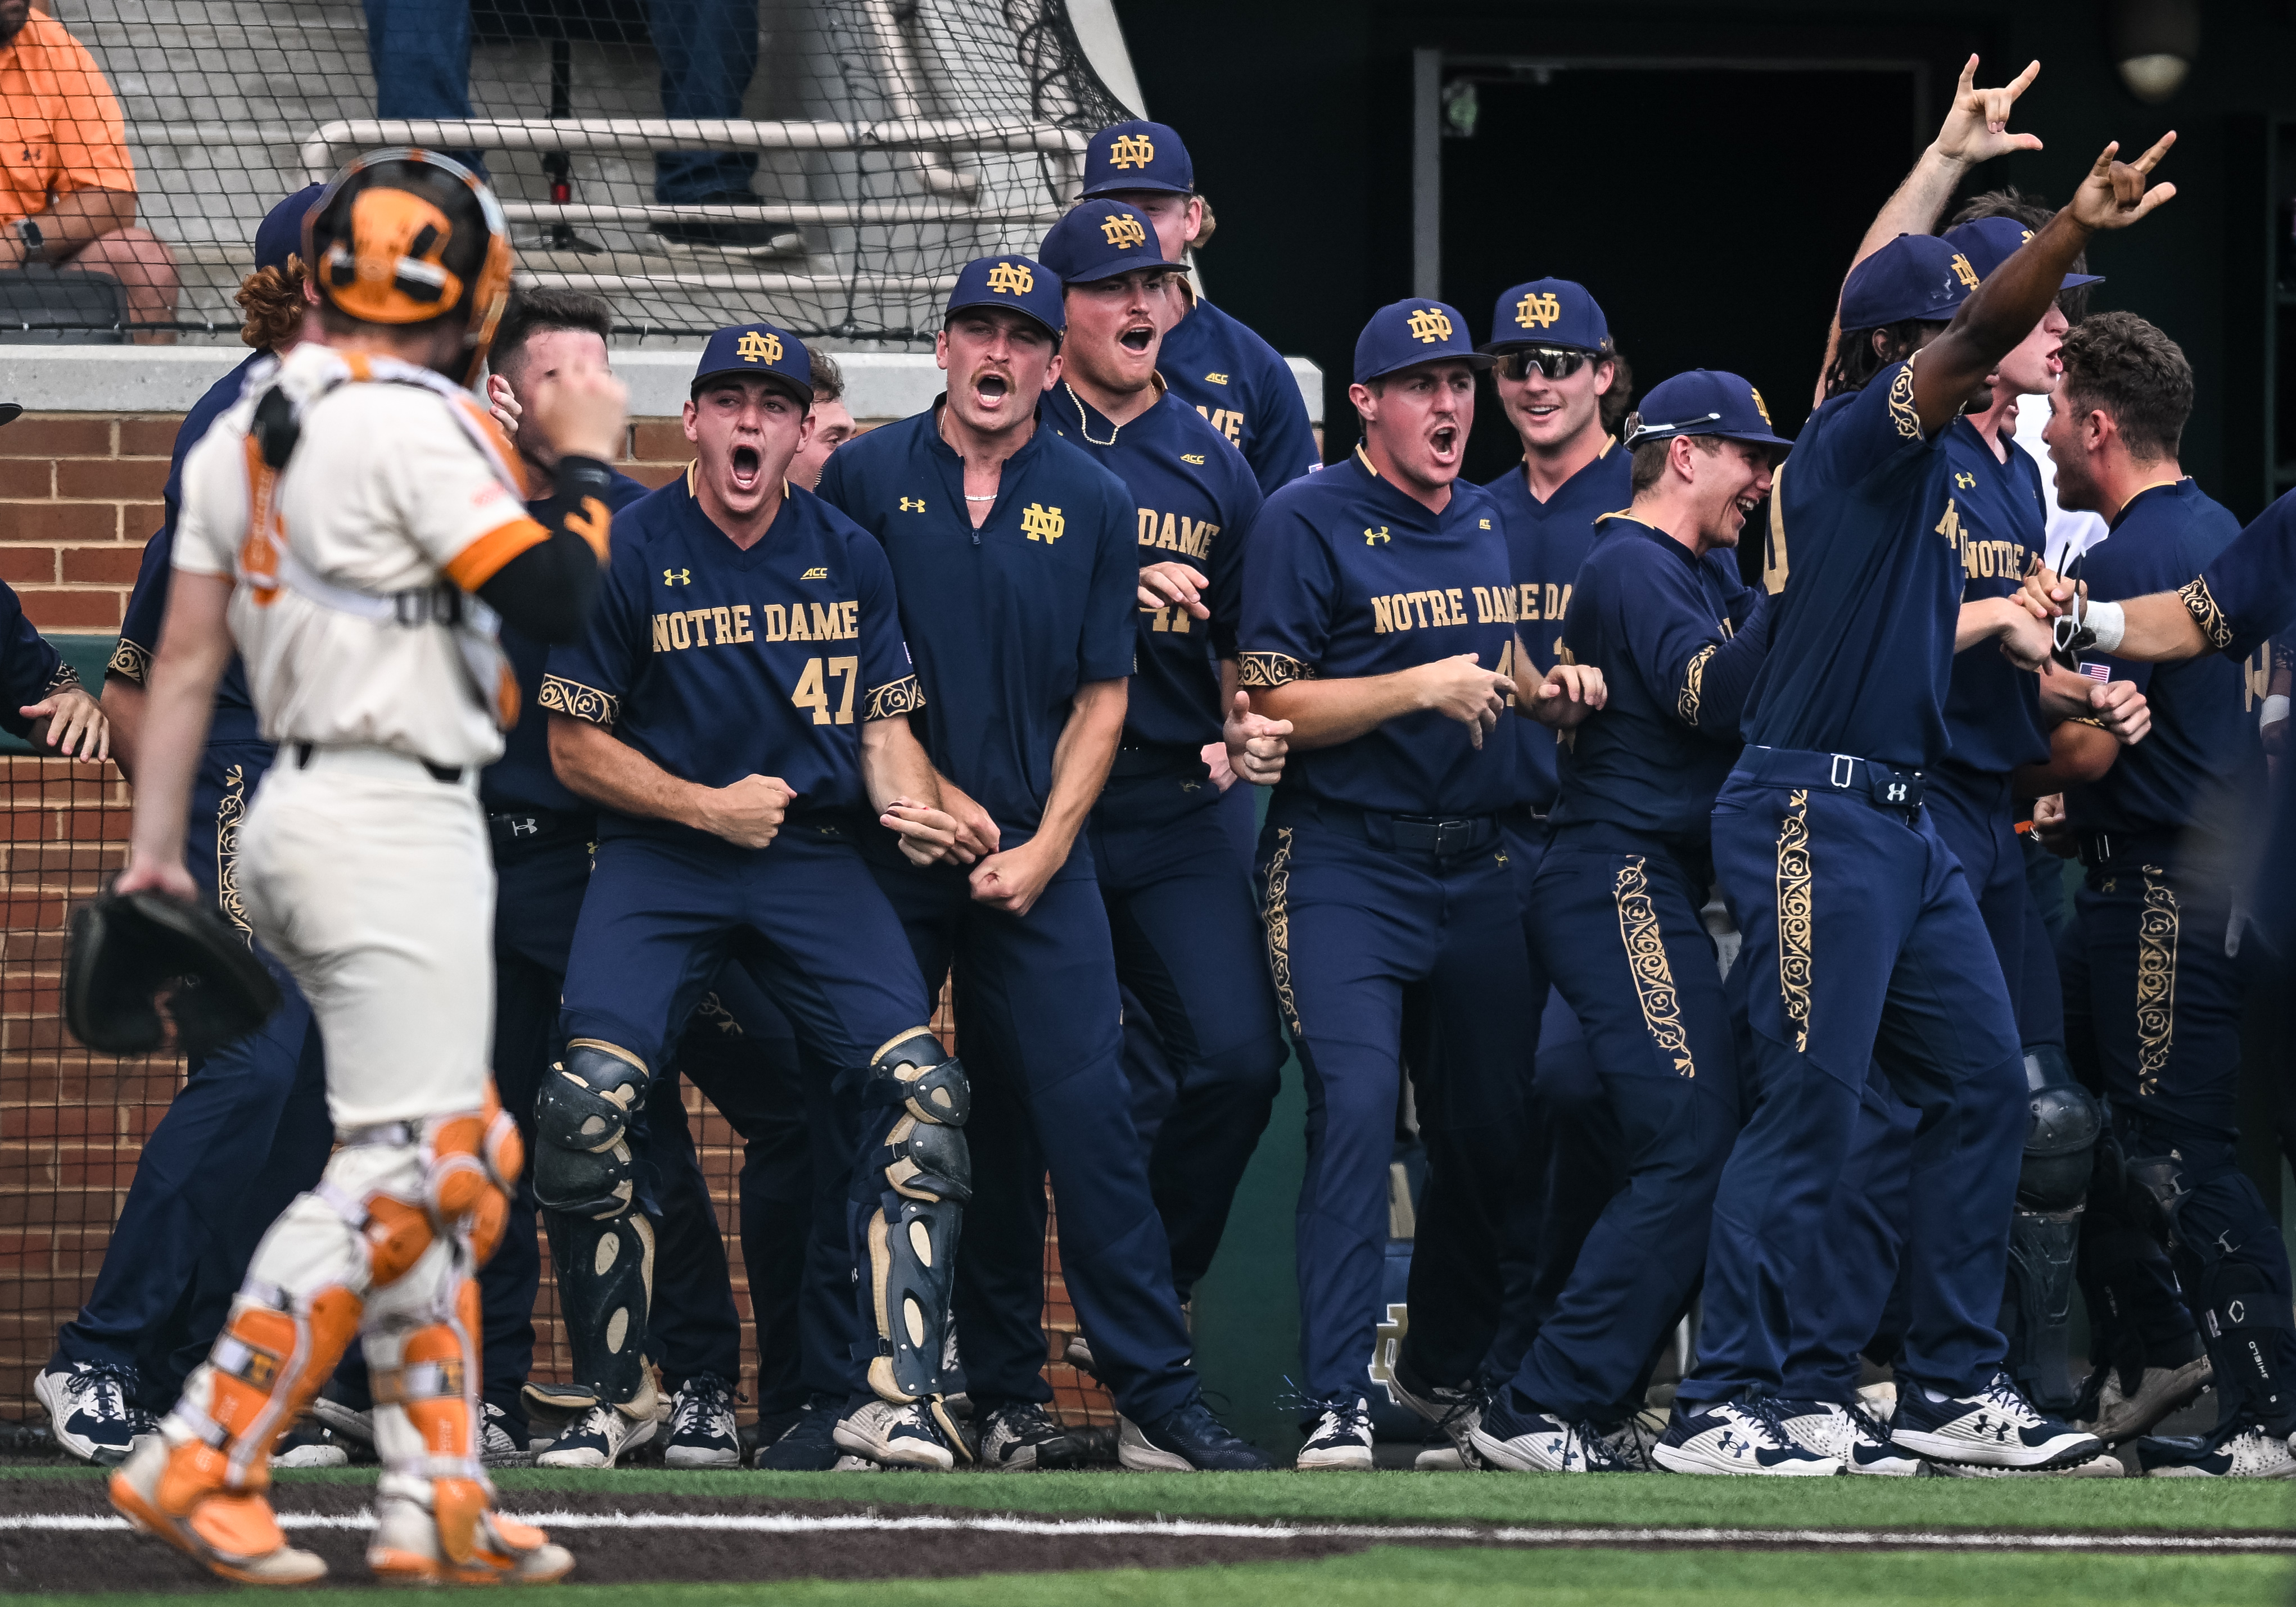 Roster for 2022 Notre Dame College World Series baseball team